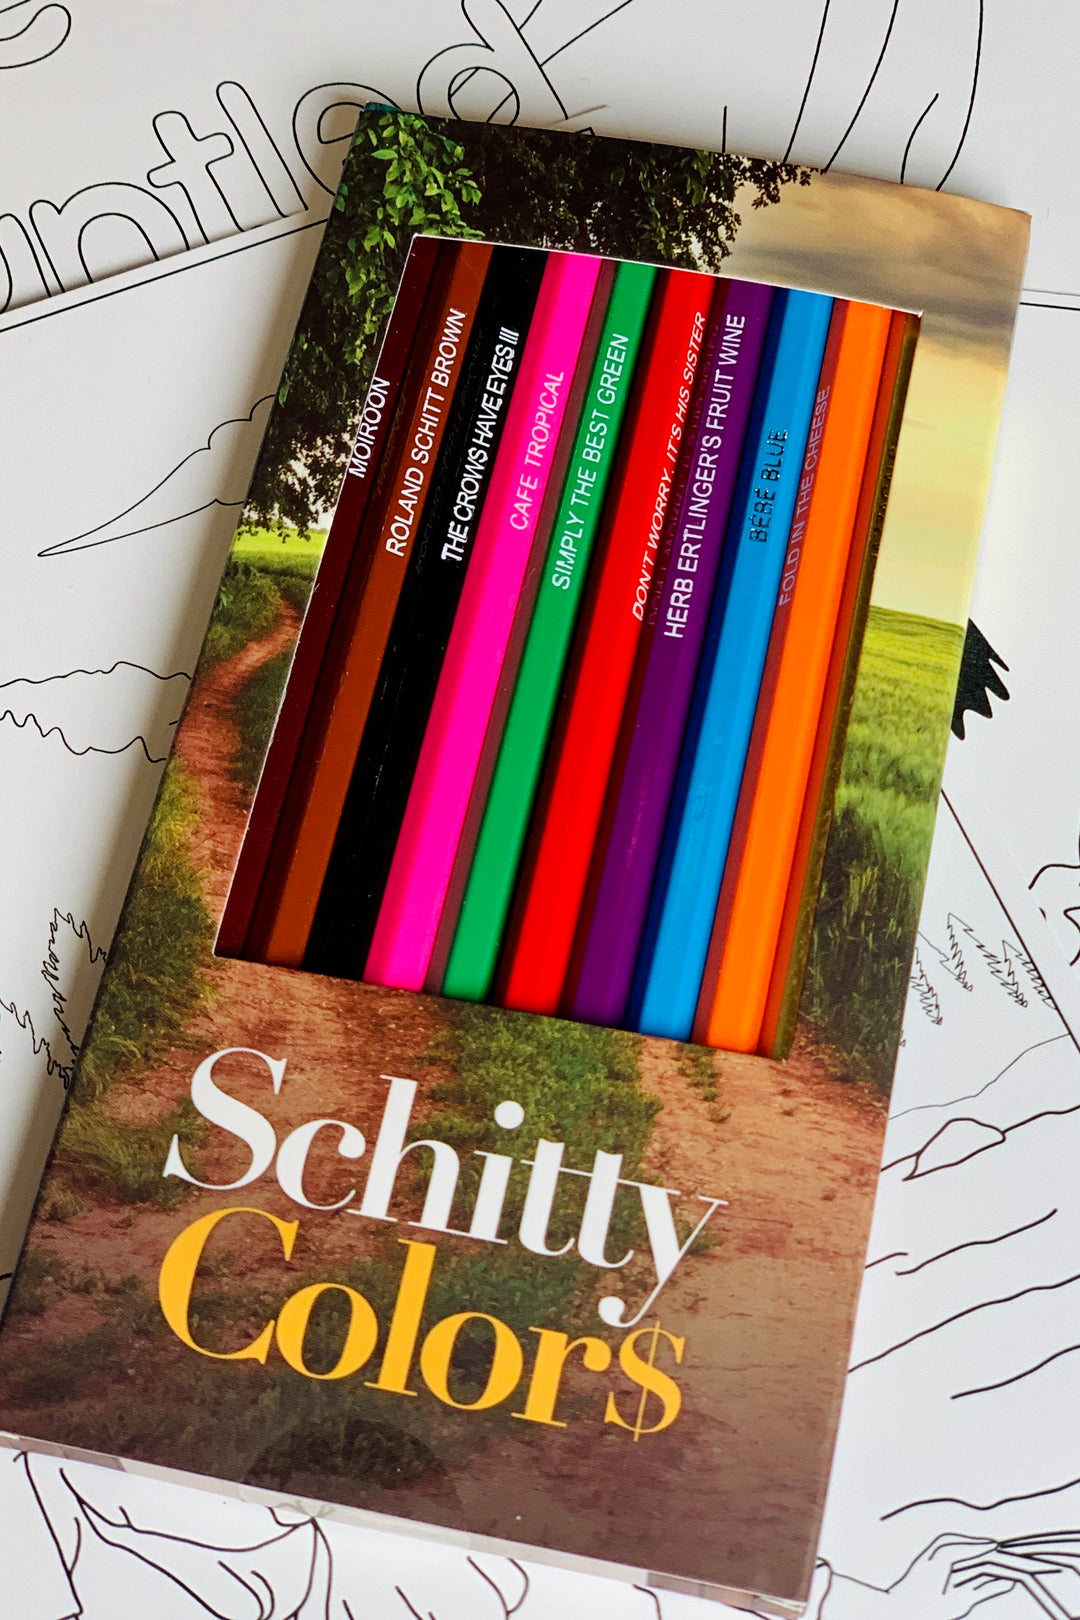 Schitty Colors Vol. 1 Coloring Gift Set